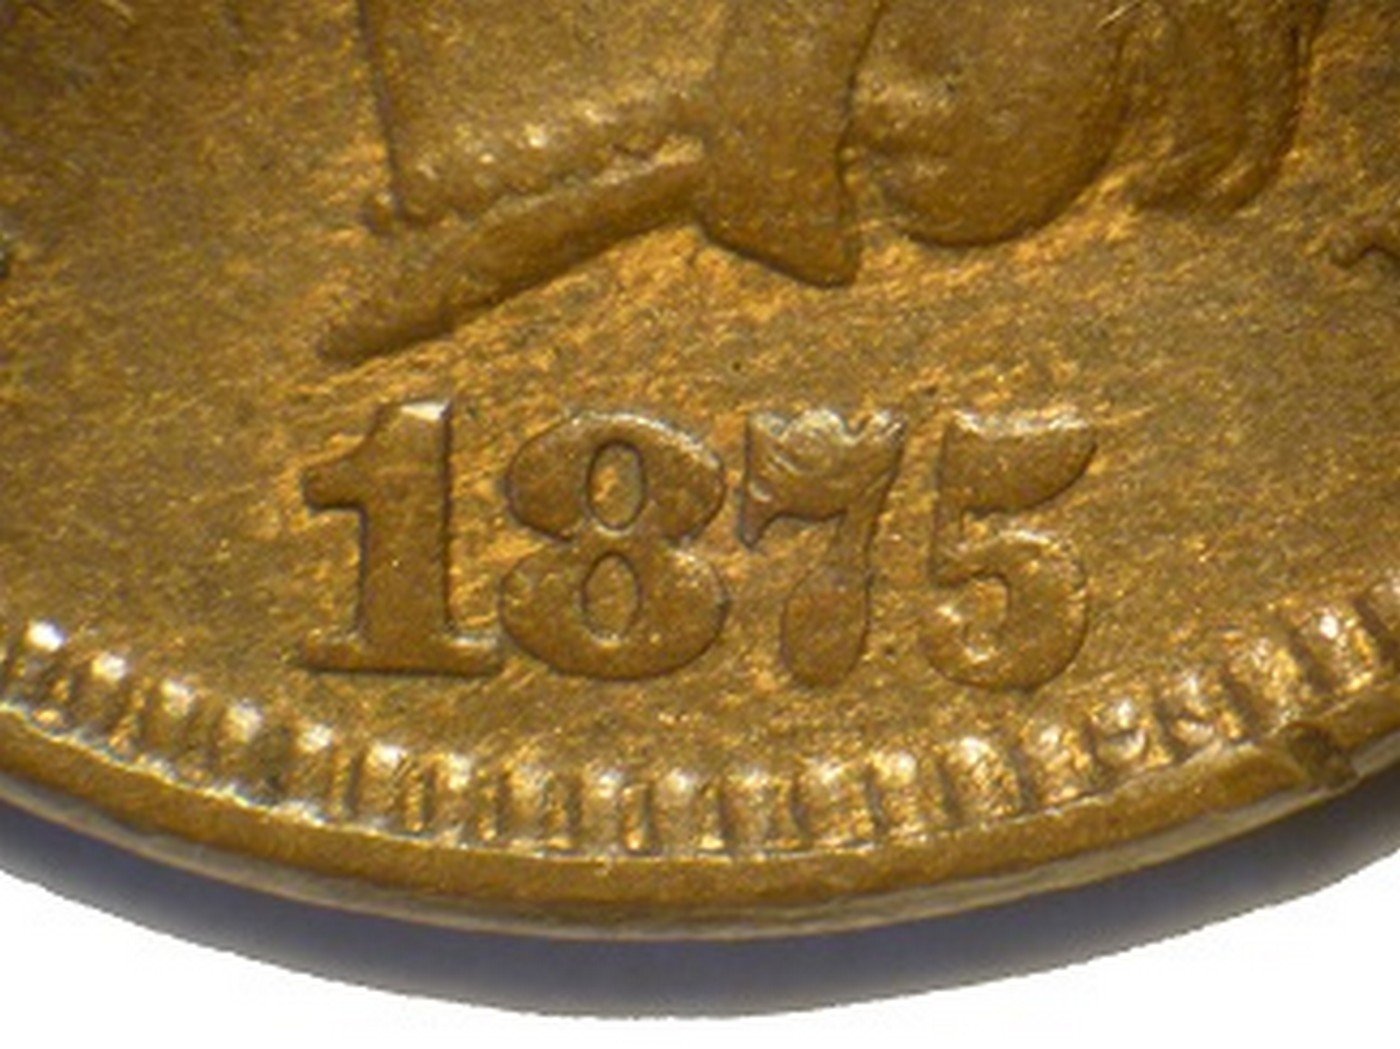 1875 RPD-011 - Indian Head Penny - Photo by David Poliquin